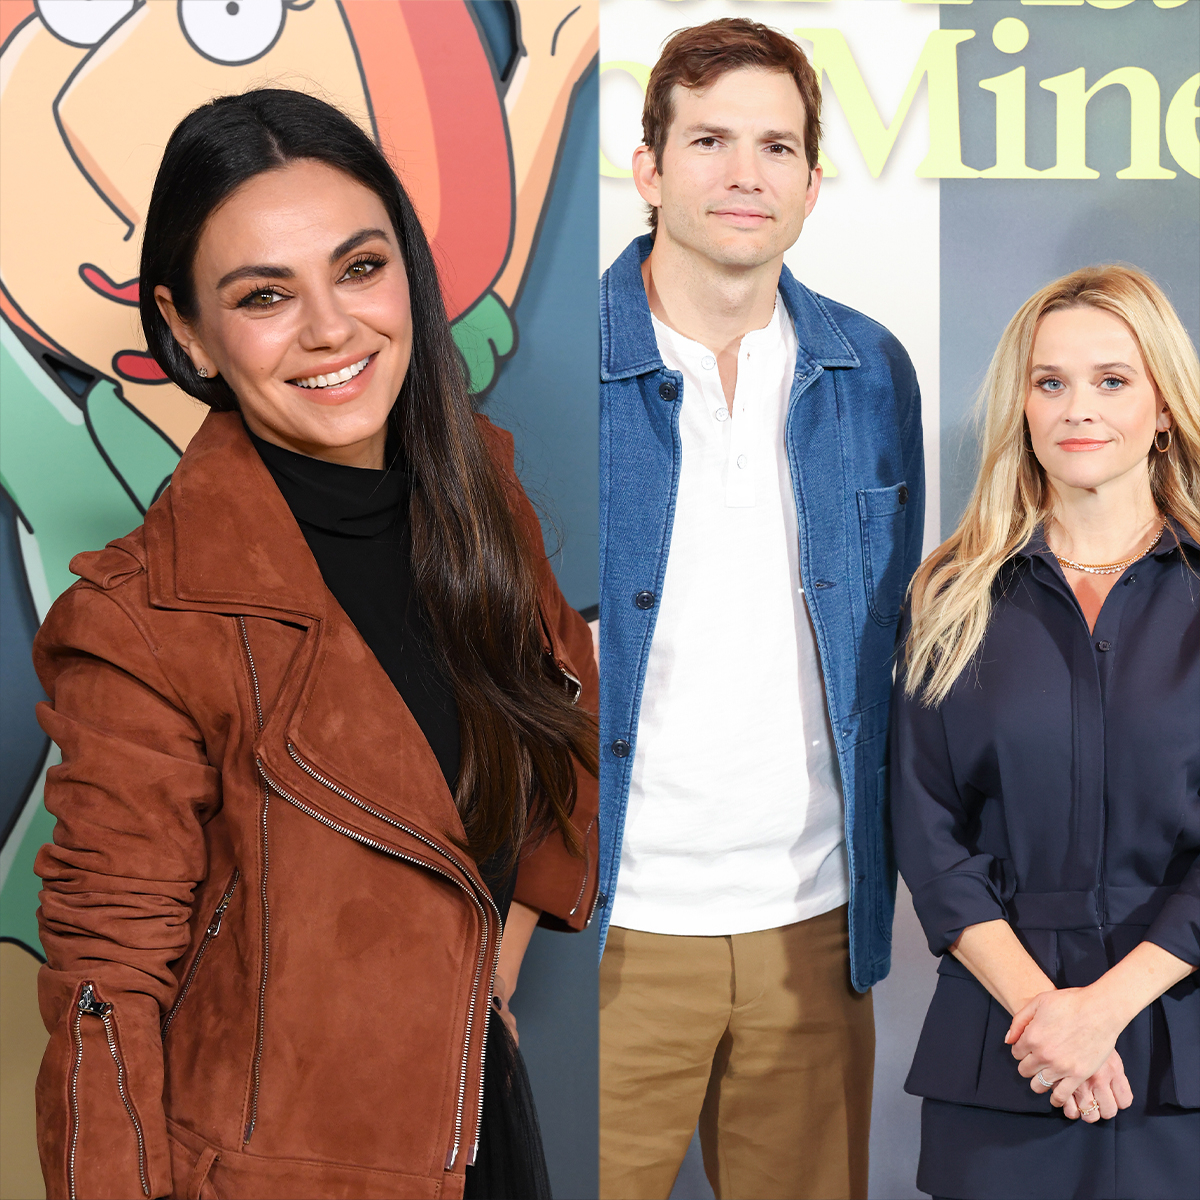 Mila Kunis Totally Called Out Ashton Kutcher and Reese Witherspoon Over Those “Awkward” Red Carpet Pics – E! Online